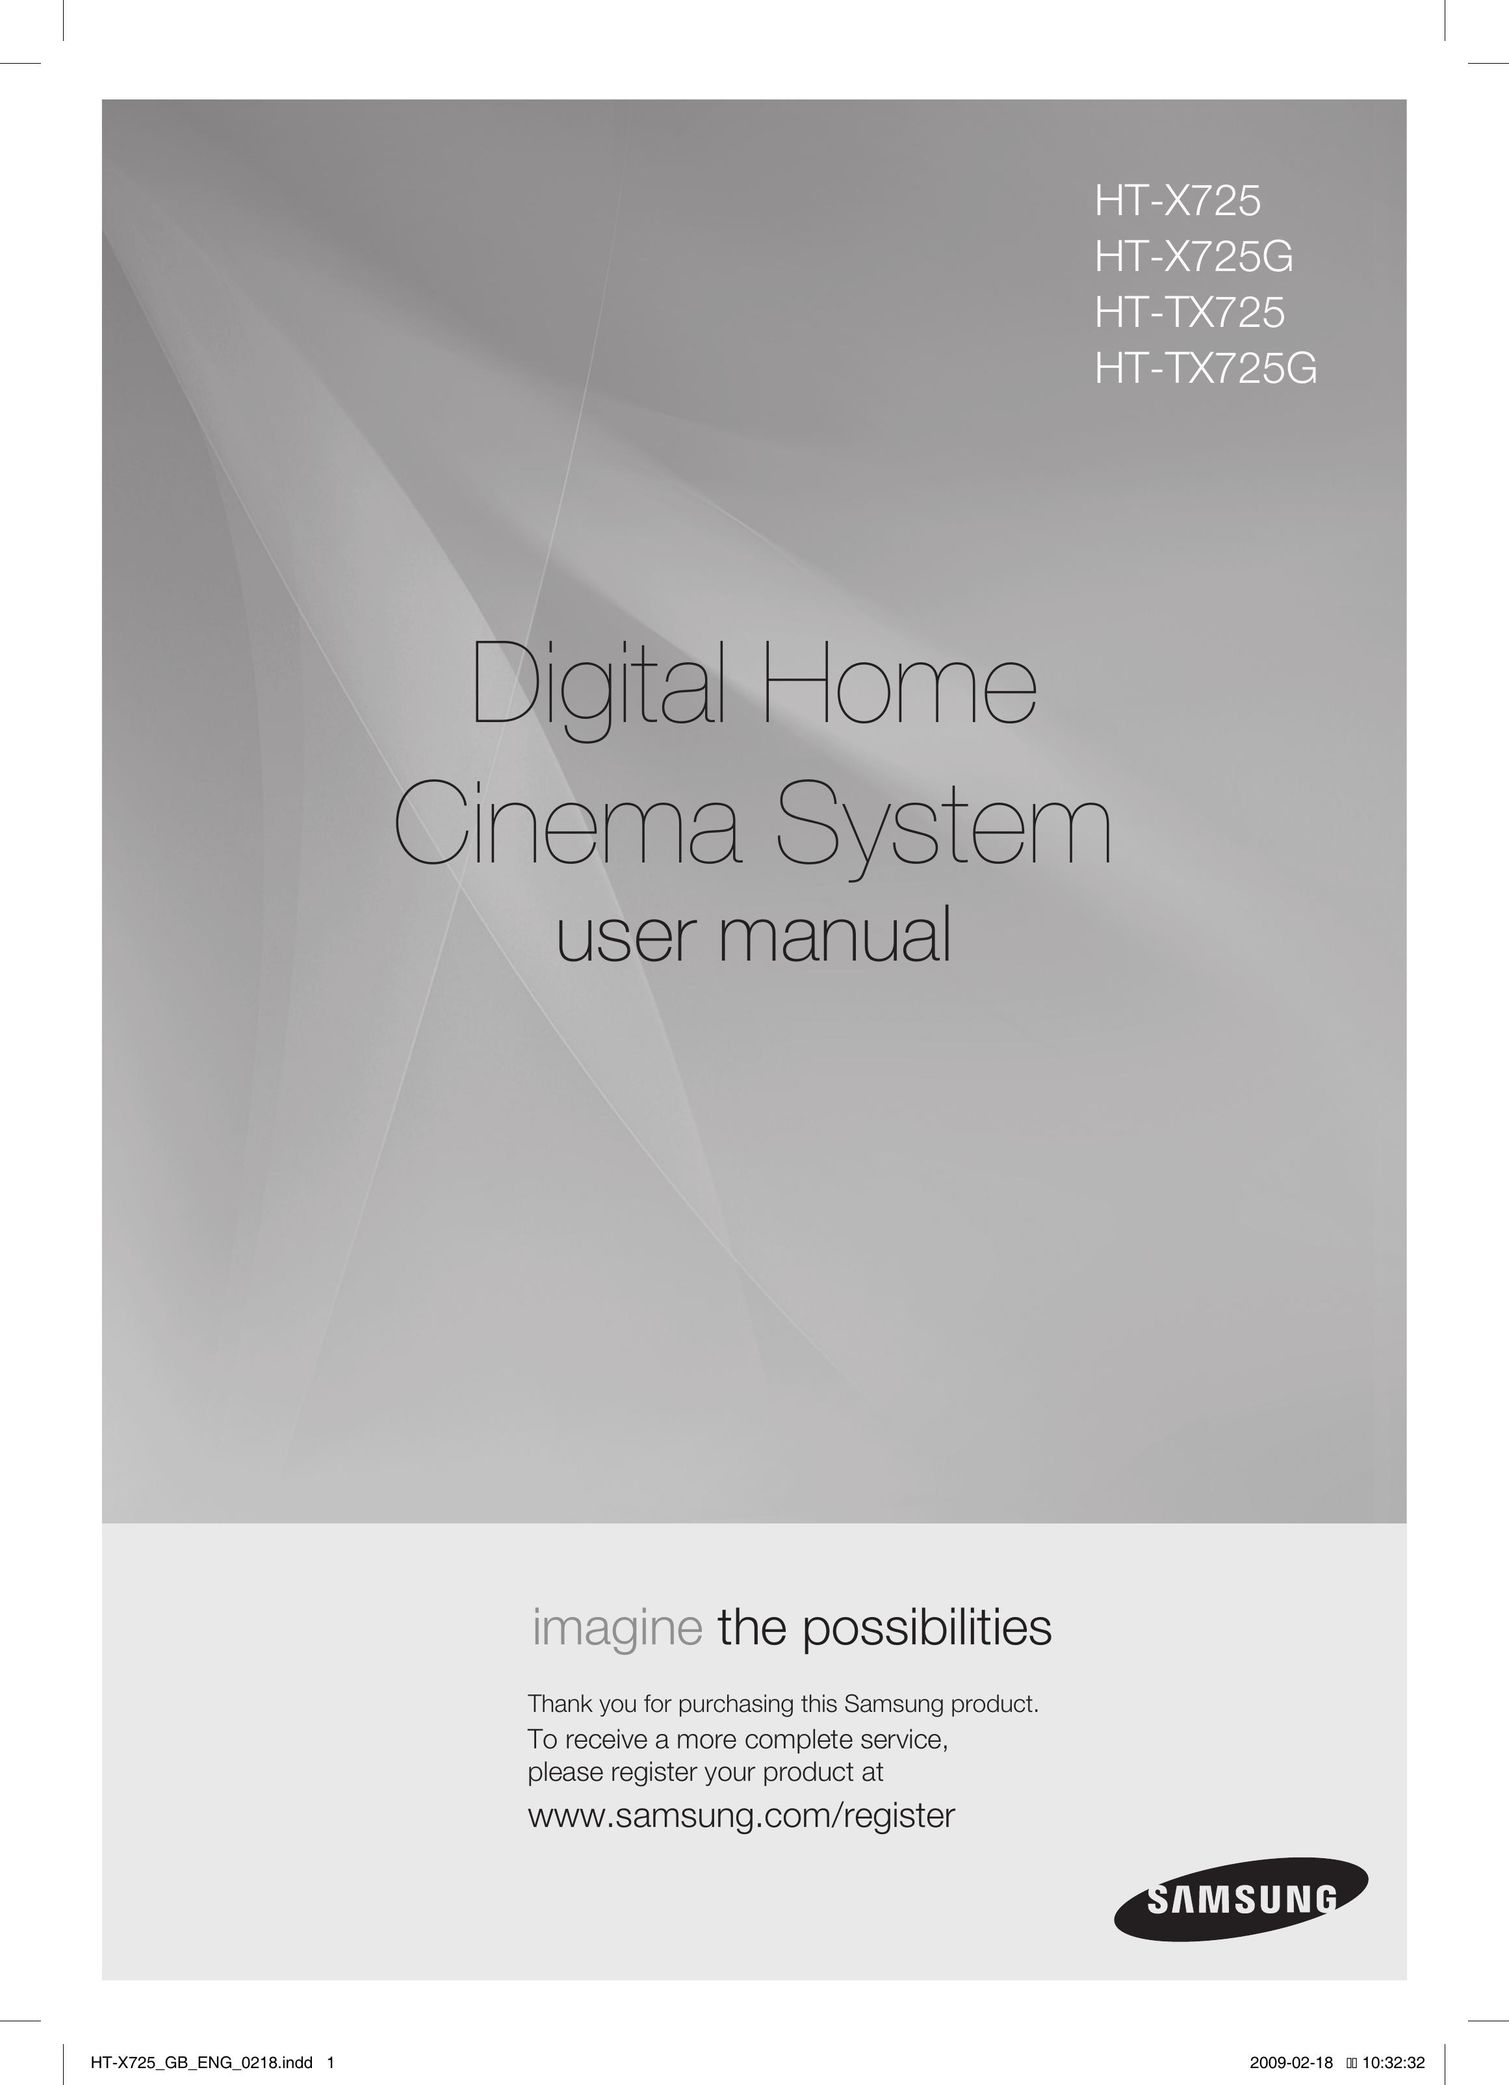 Samsung HT-X725 Stereo System User Manual